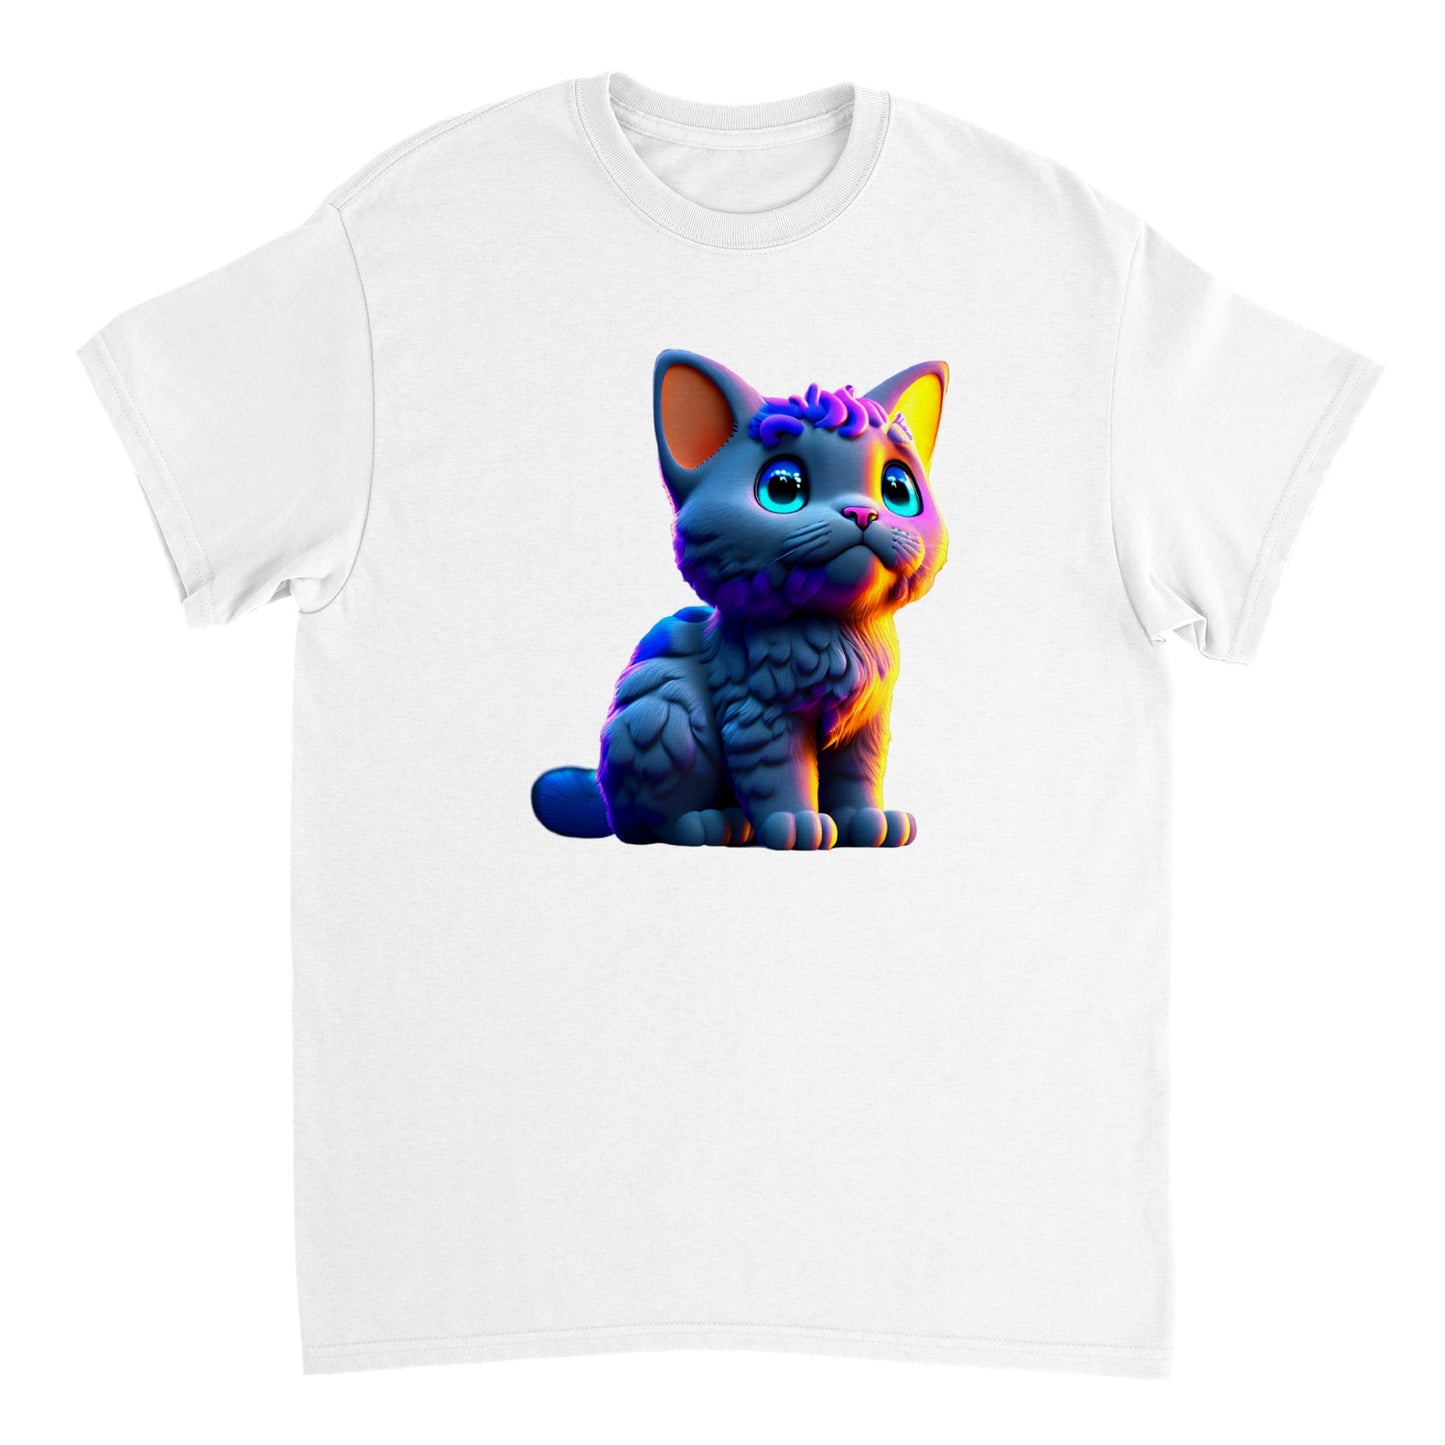 Adorable, Cool, Cute Cats and Kittens Toy - Heavyweight Unisex Crewneck T-shirt 21